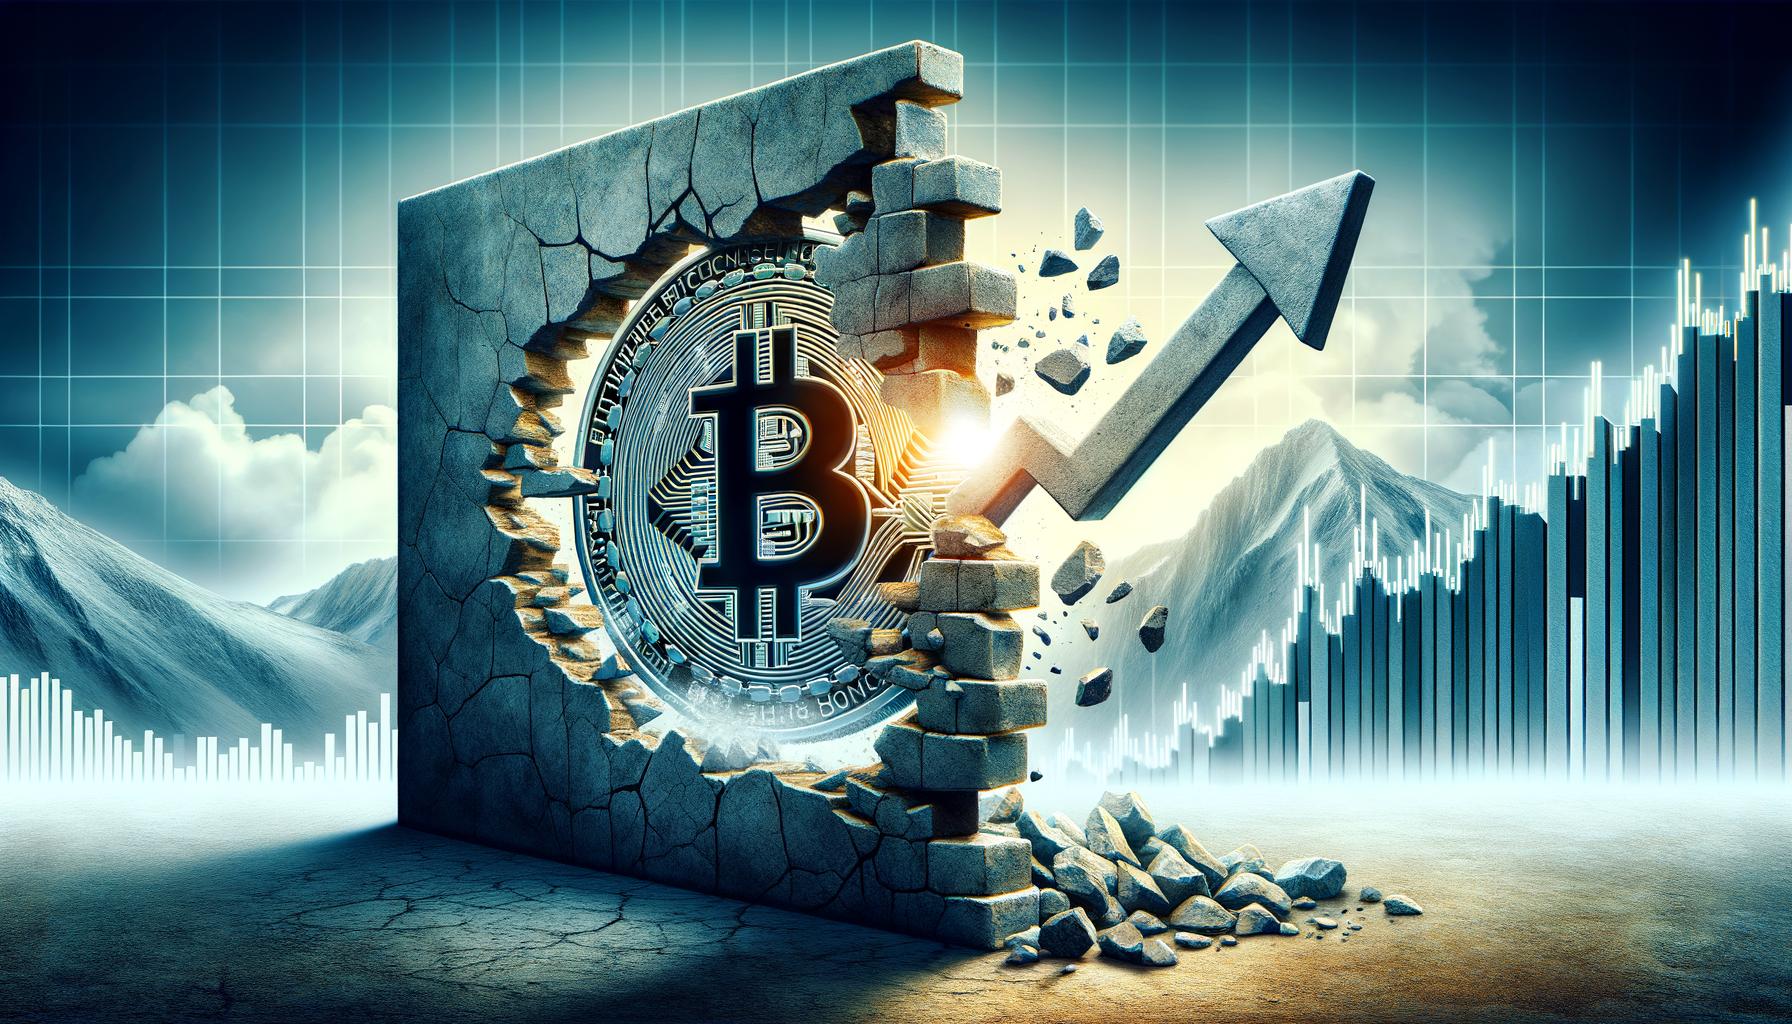 Bitcoin Price Challenge: Can It Break Through and Resume Climbing?